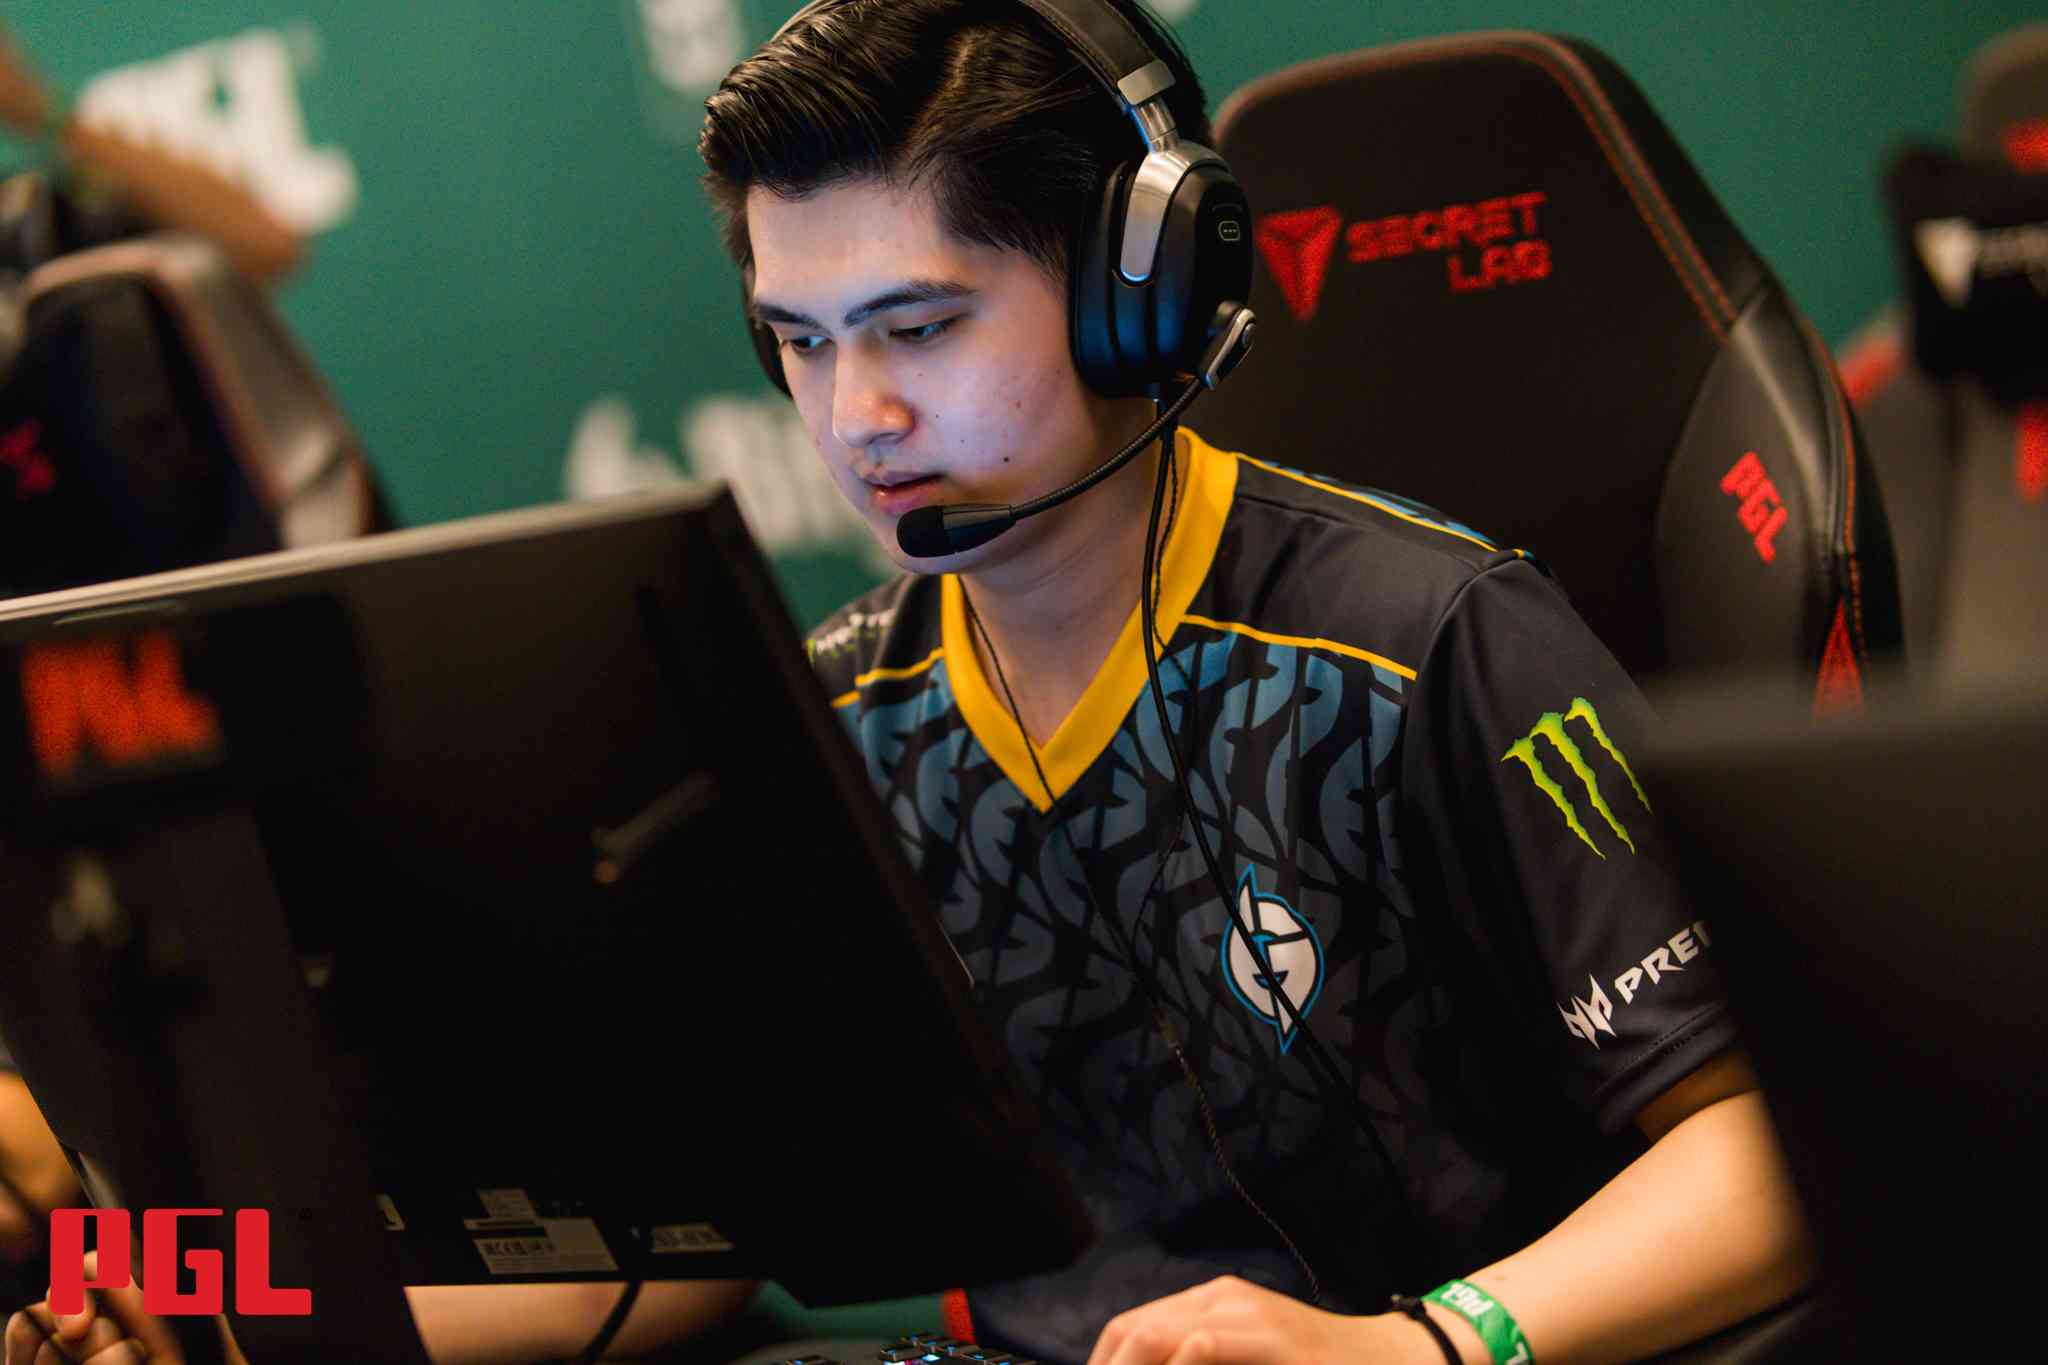 Timothy "autimatic" Ta, the Major winner, will be looking to step up as the backbone of the new Evil Geniuses roster (Image Credits: Joao Ferreira/PGL)